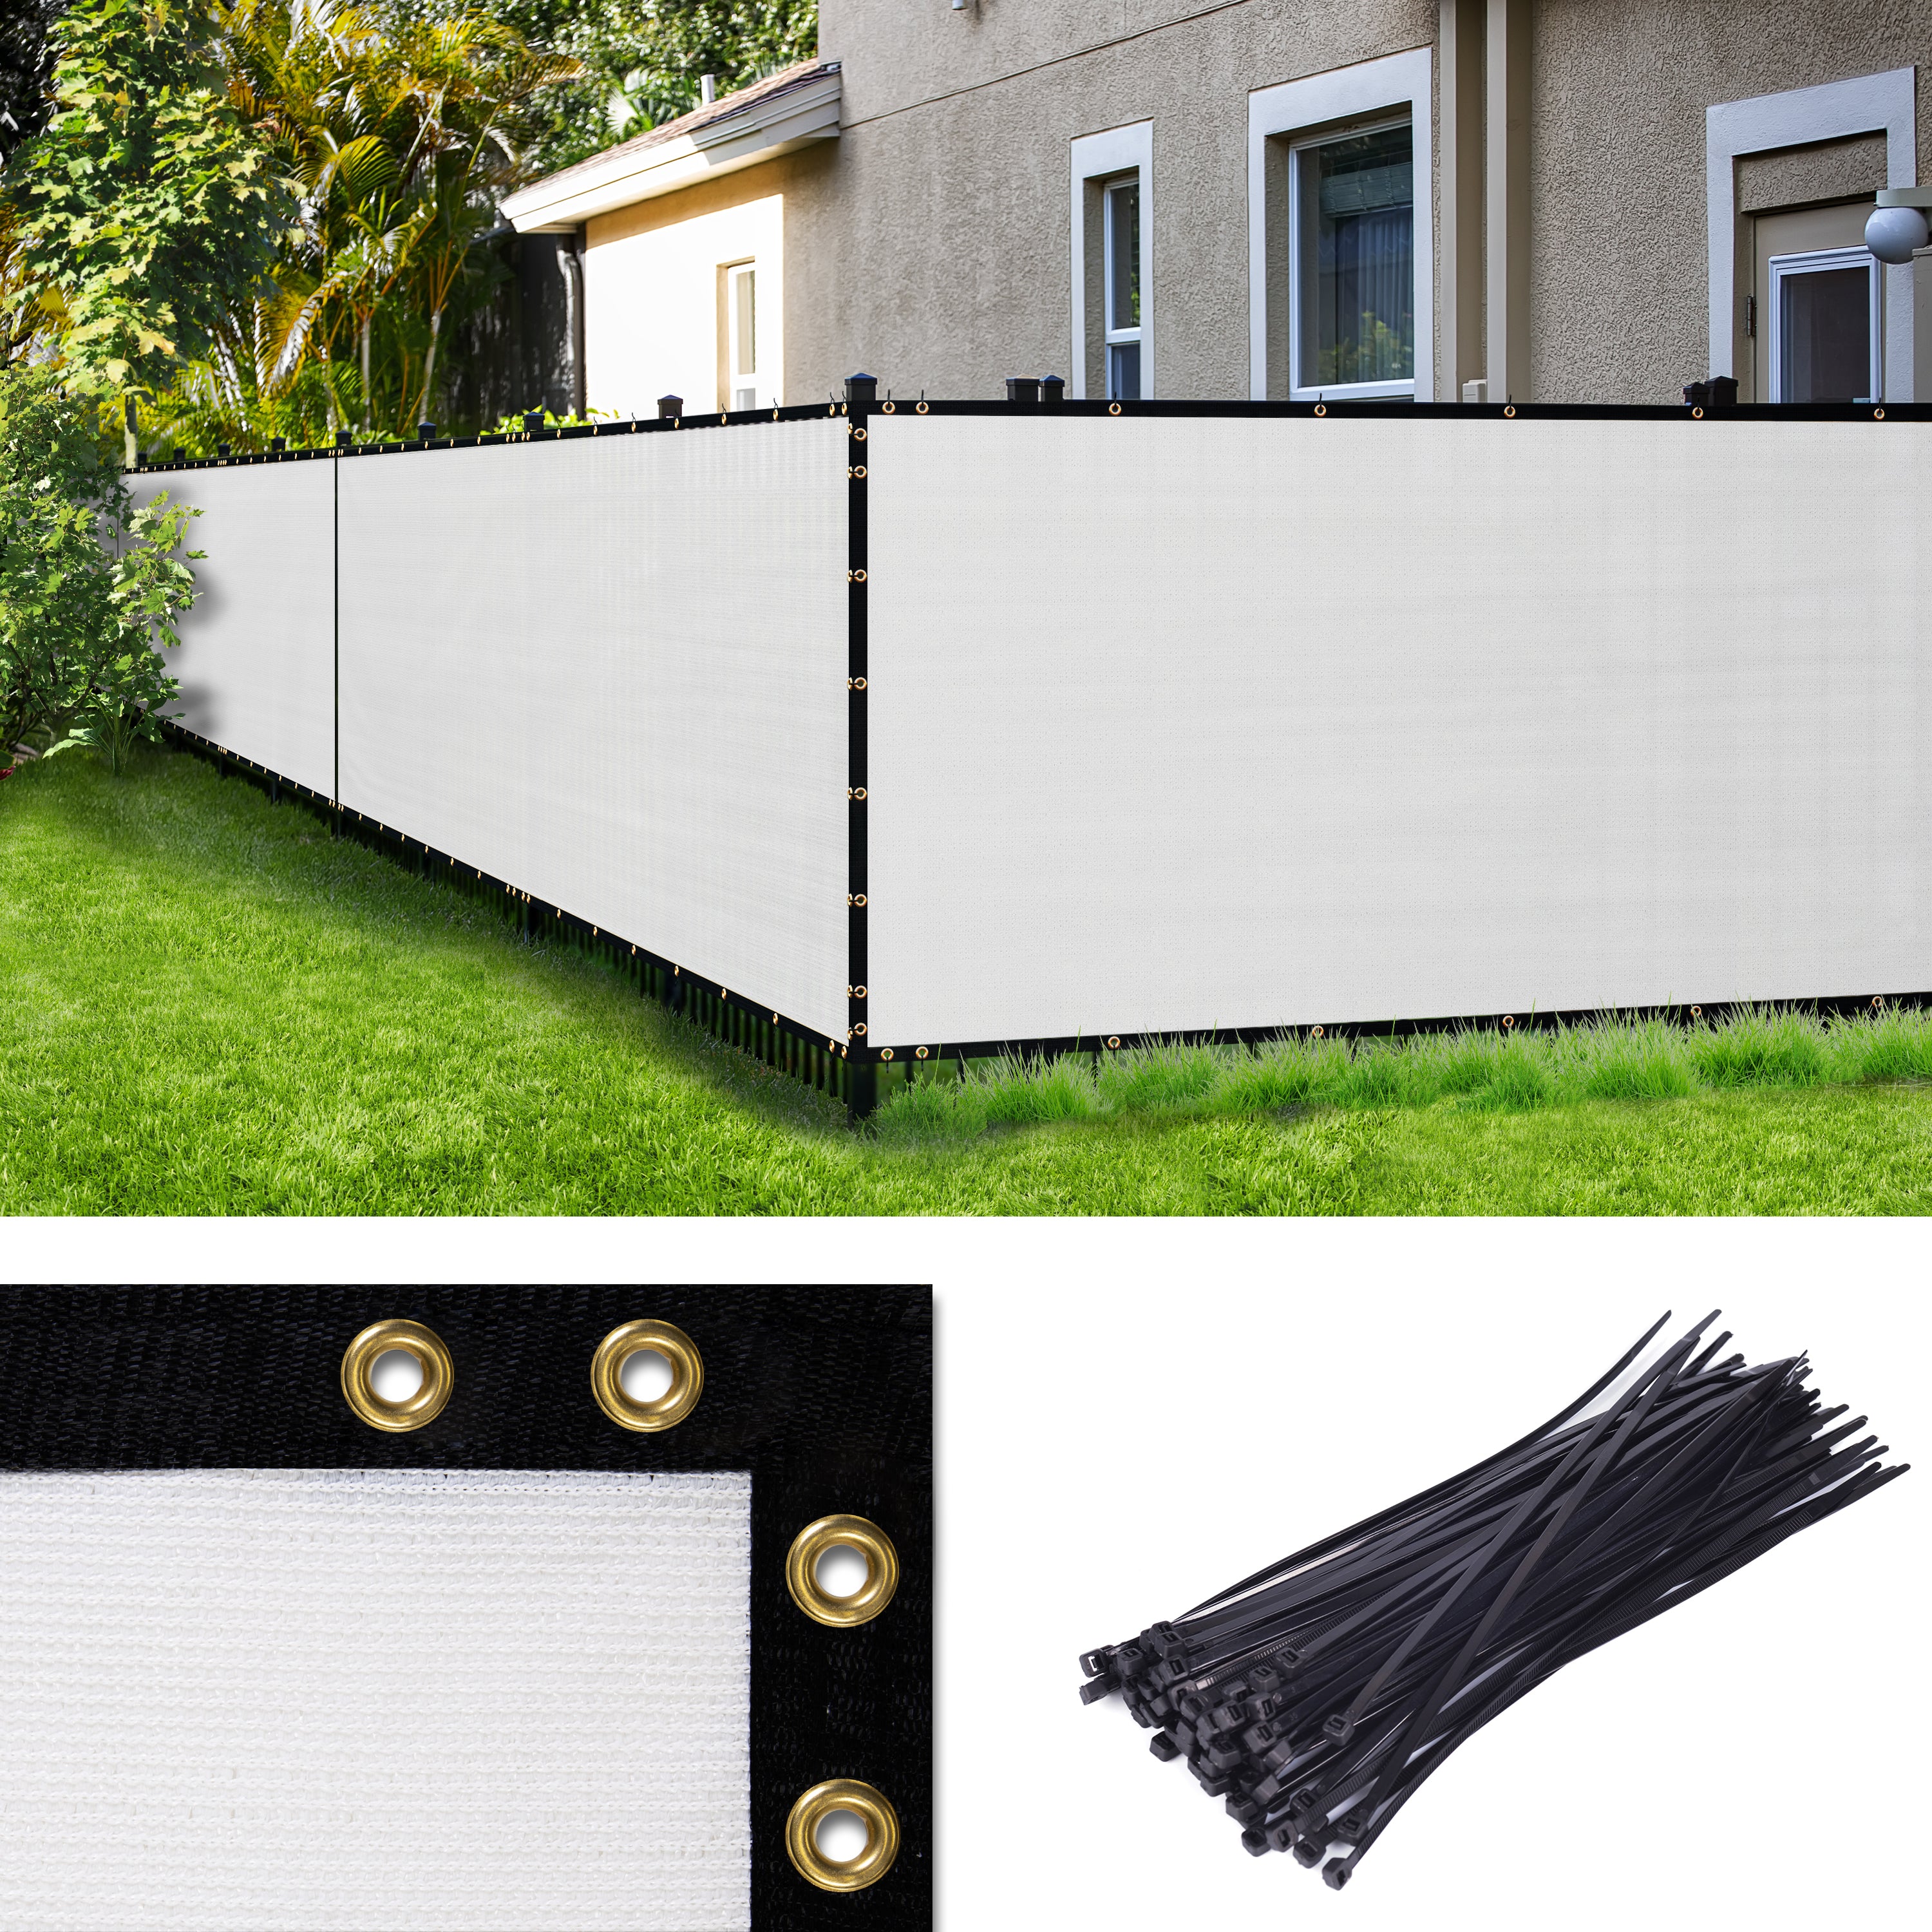 3 Ft. 4 Ft. & 5 Ft. Privacy Fence Screen w/ Copper Grommets